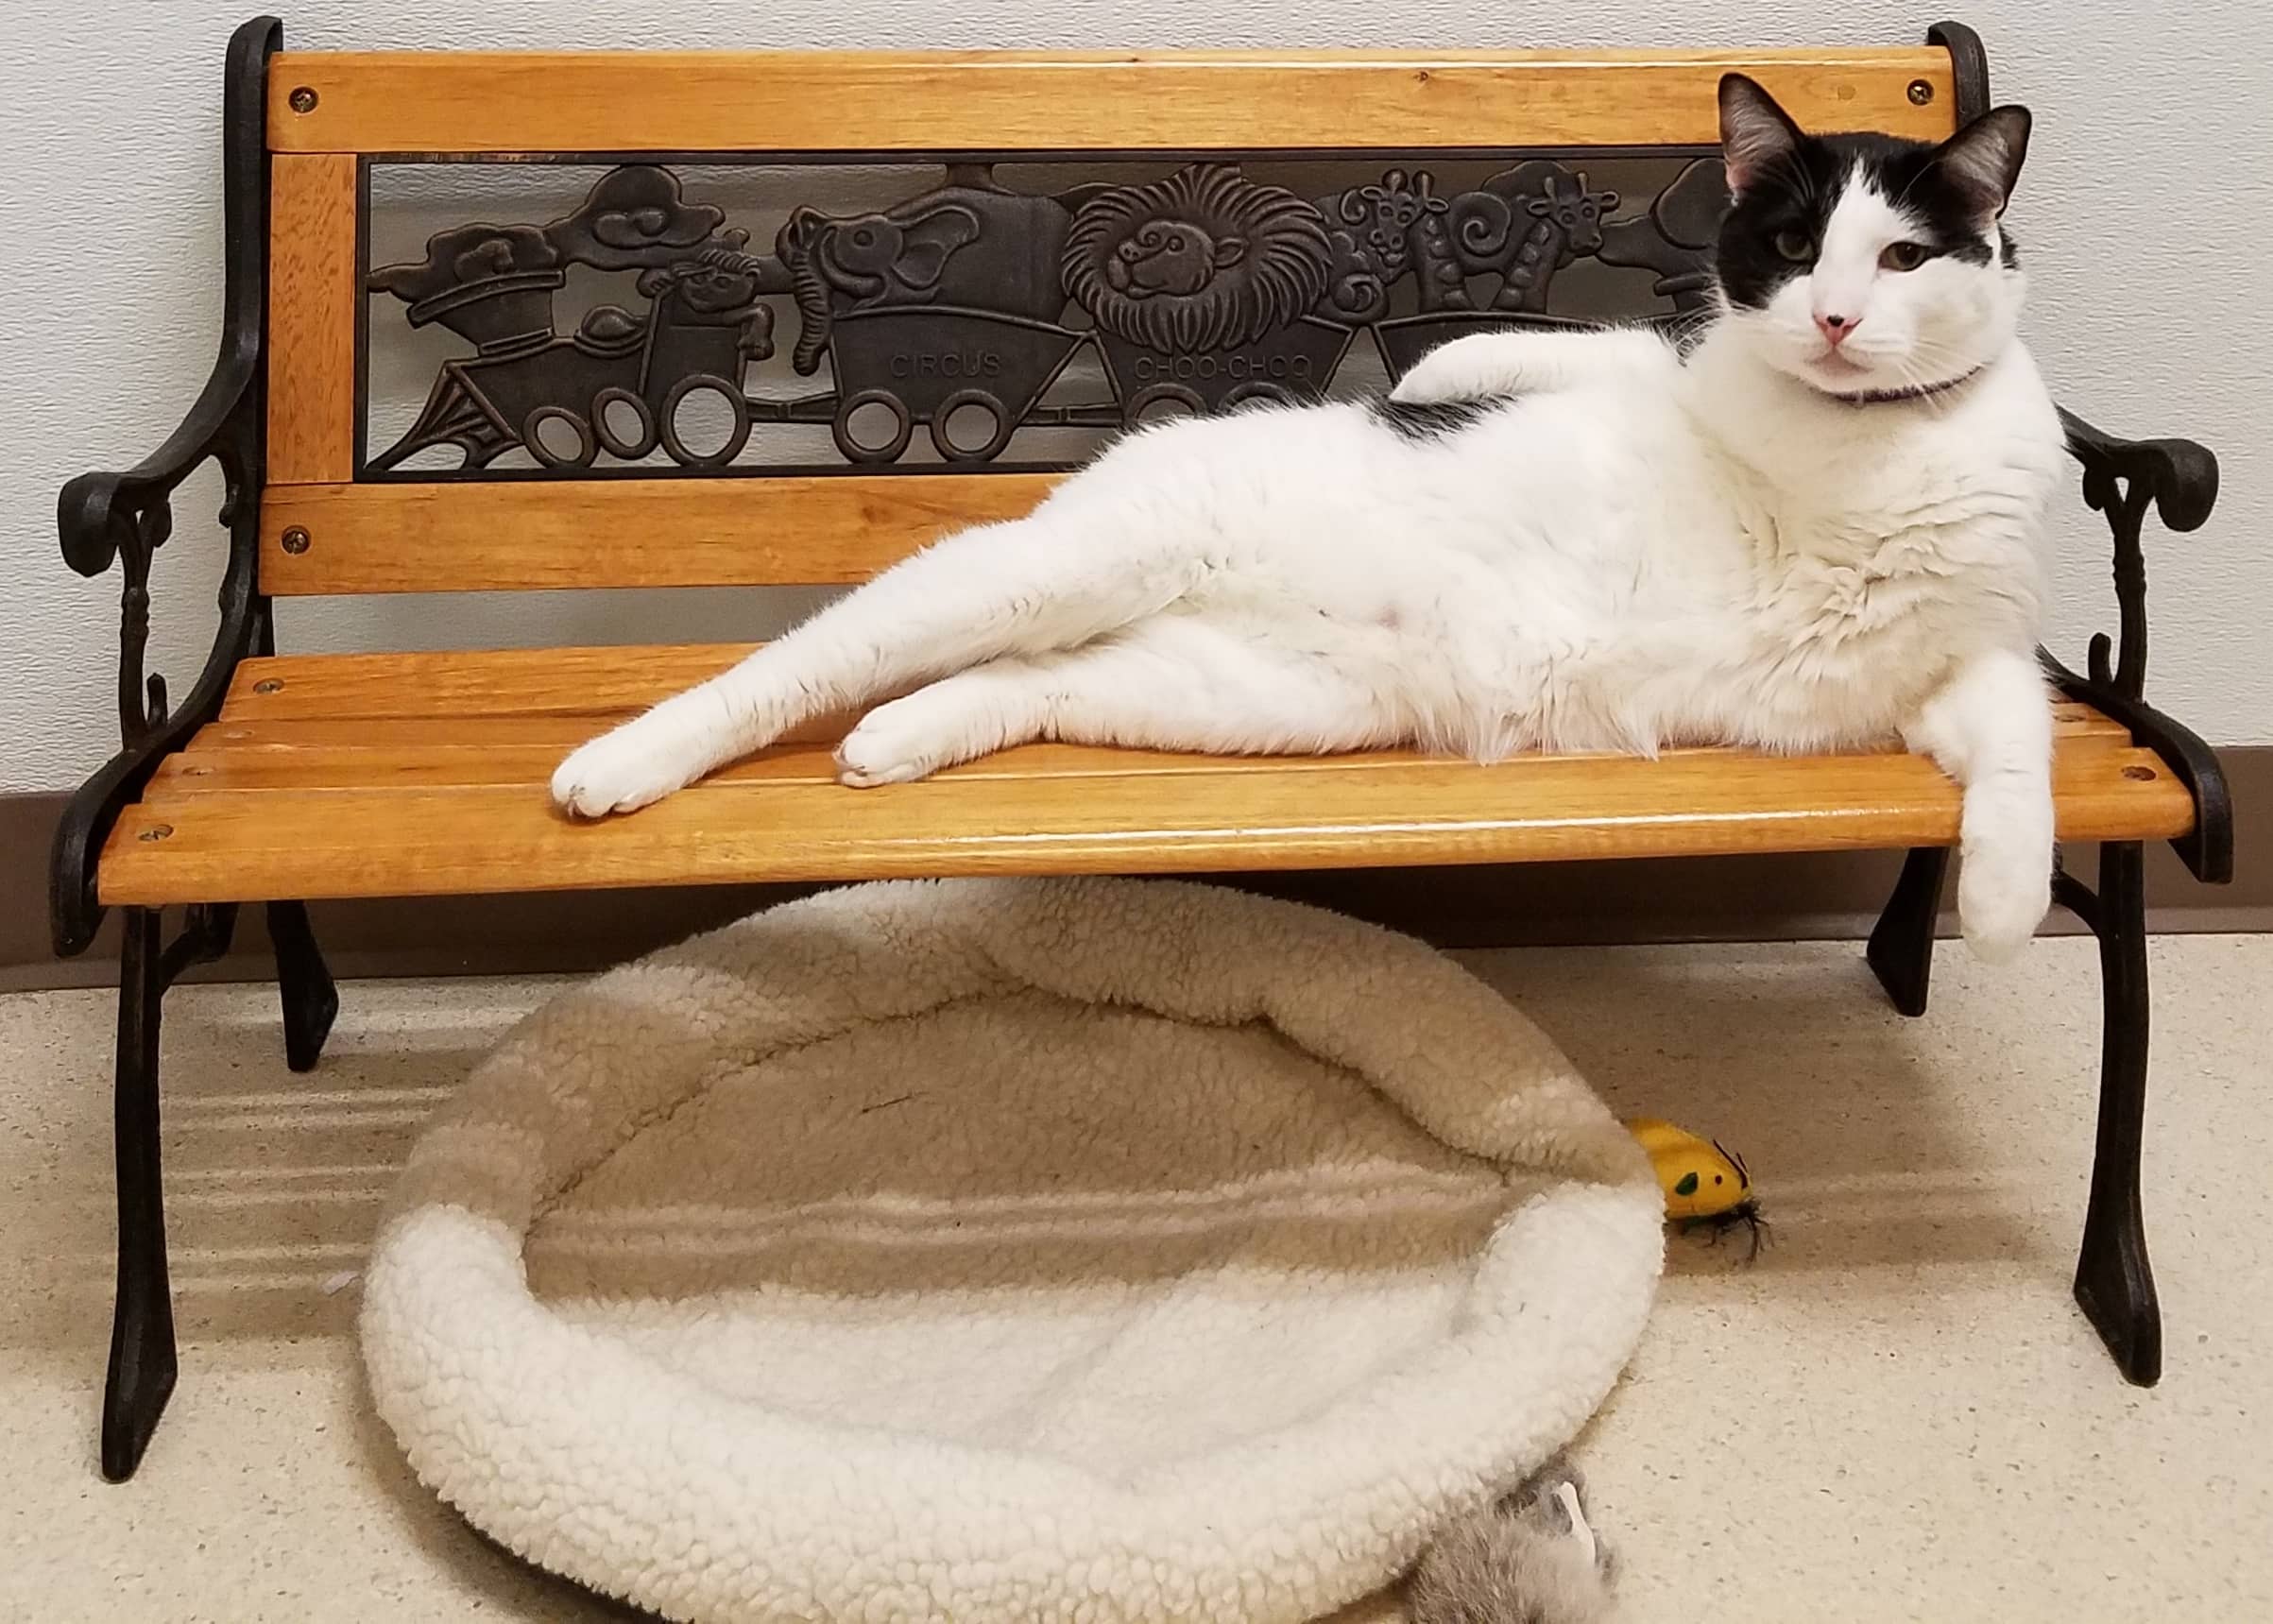 A cat named Oswald lounges suggestively on a child-sized park bench.